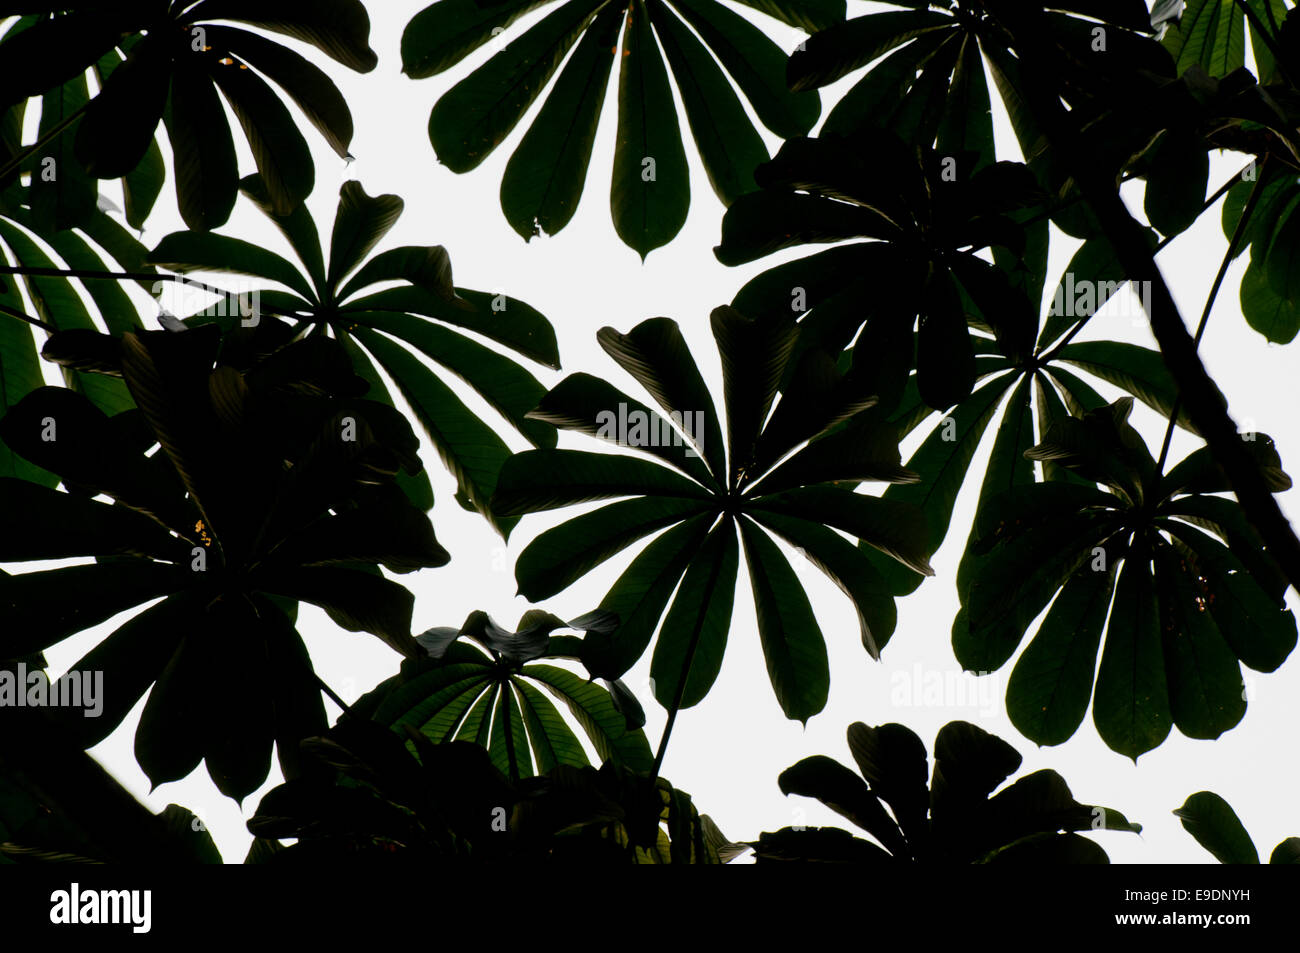 A canopy of a West African difitate form tree leaves (species unknown) taken at Wli, Ghana Stock Photo